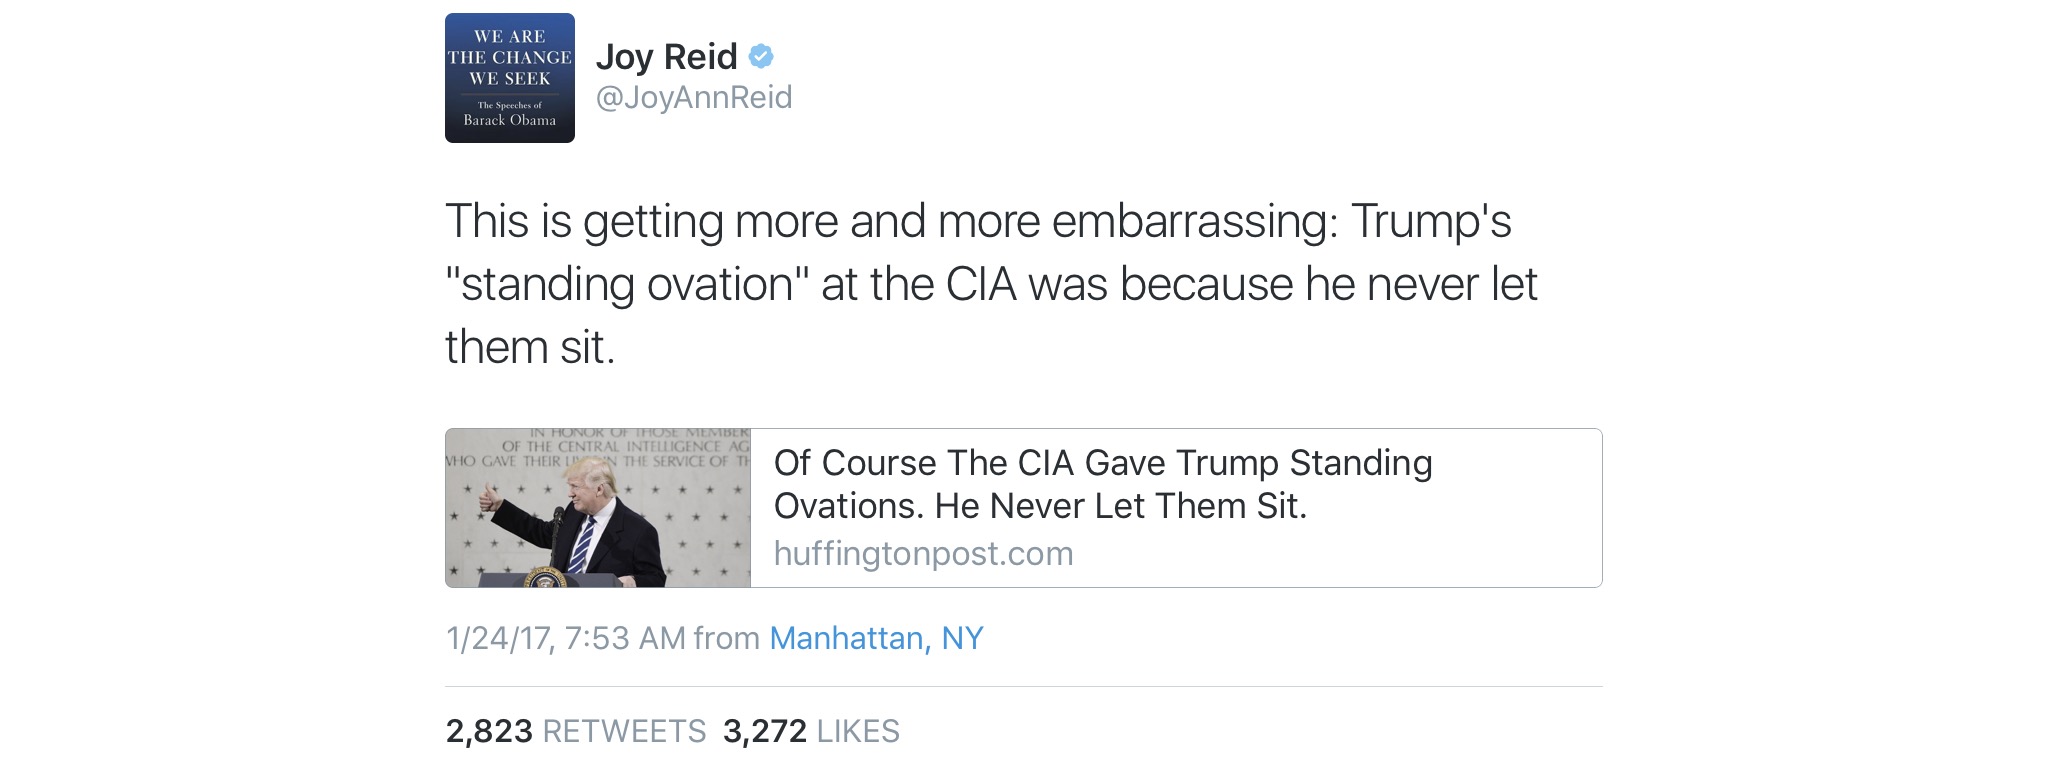 joy-reid-discovering-trump-lies-two-days-later